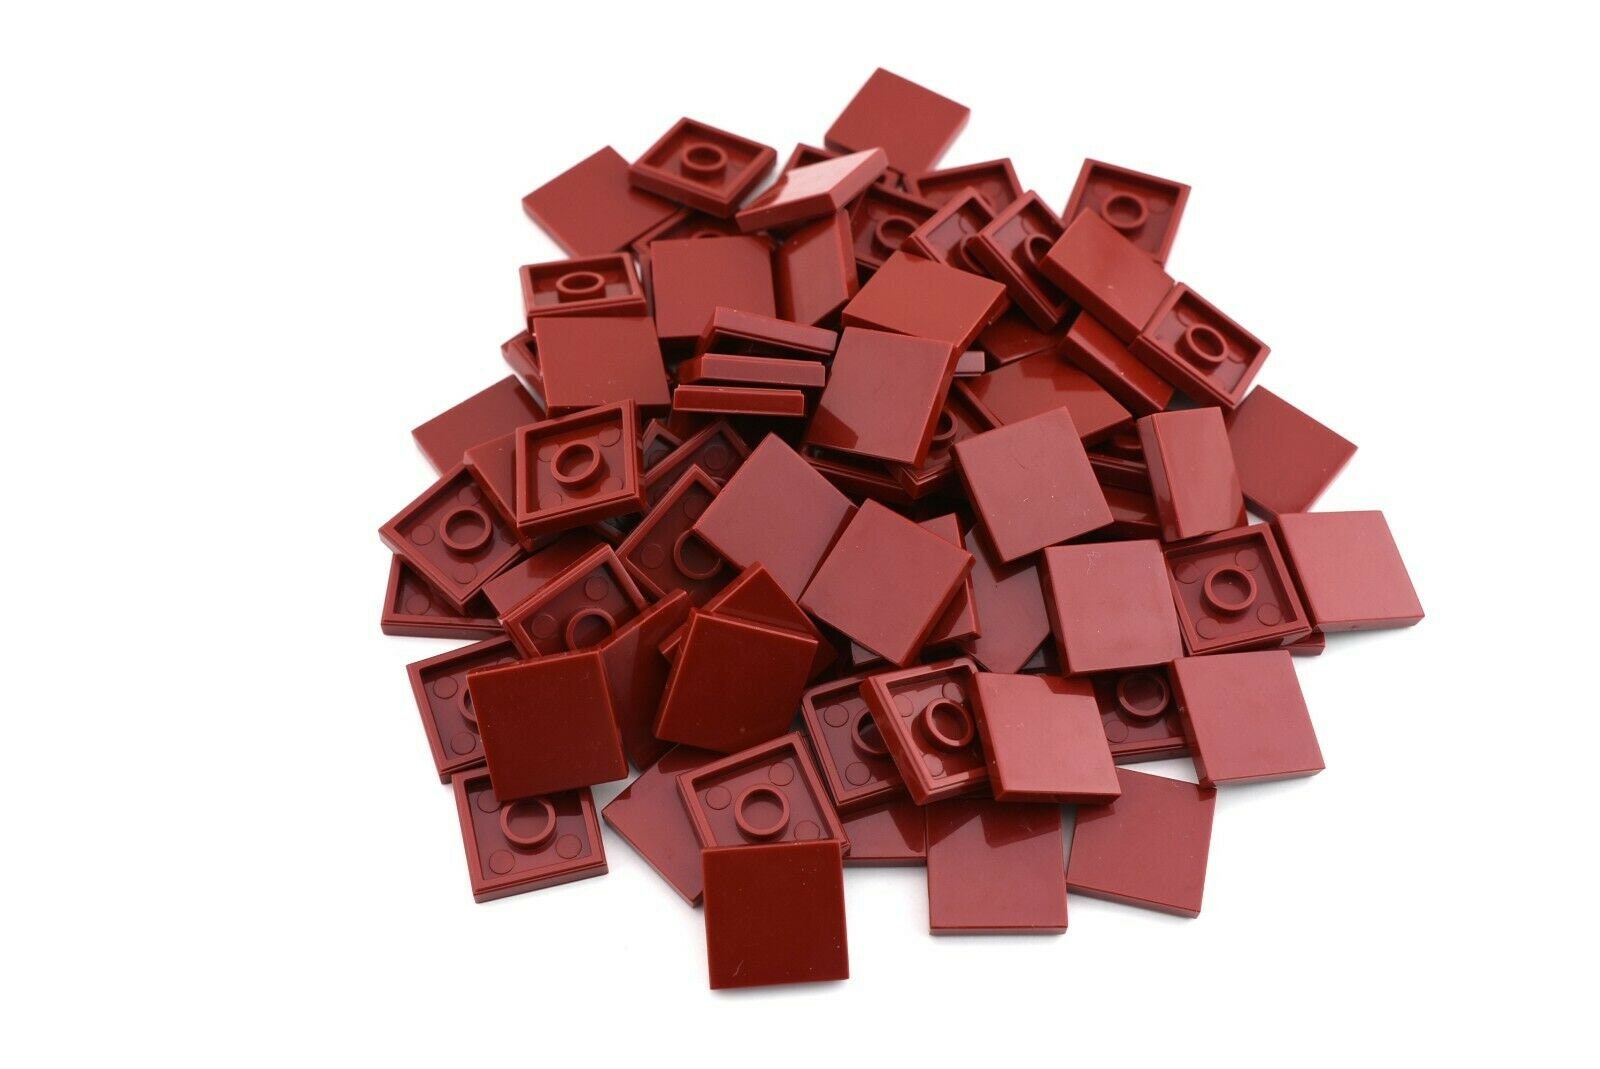 LEGO Parts and Pieces: 2x2 Red (Bright Red) Brick x100